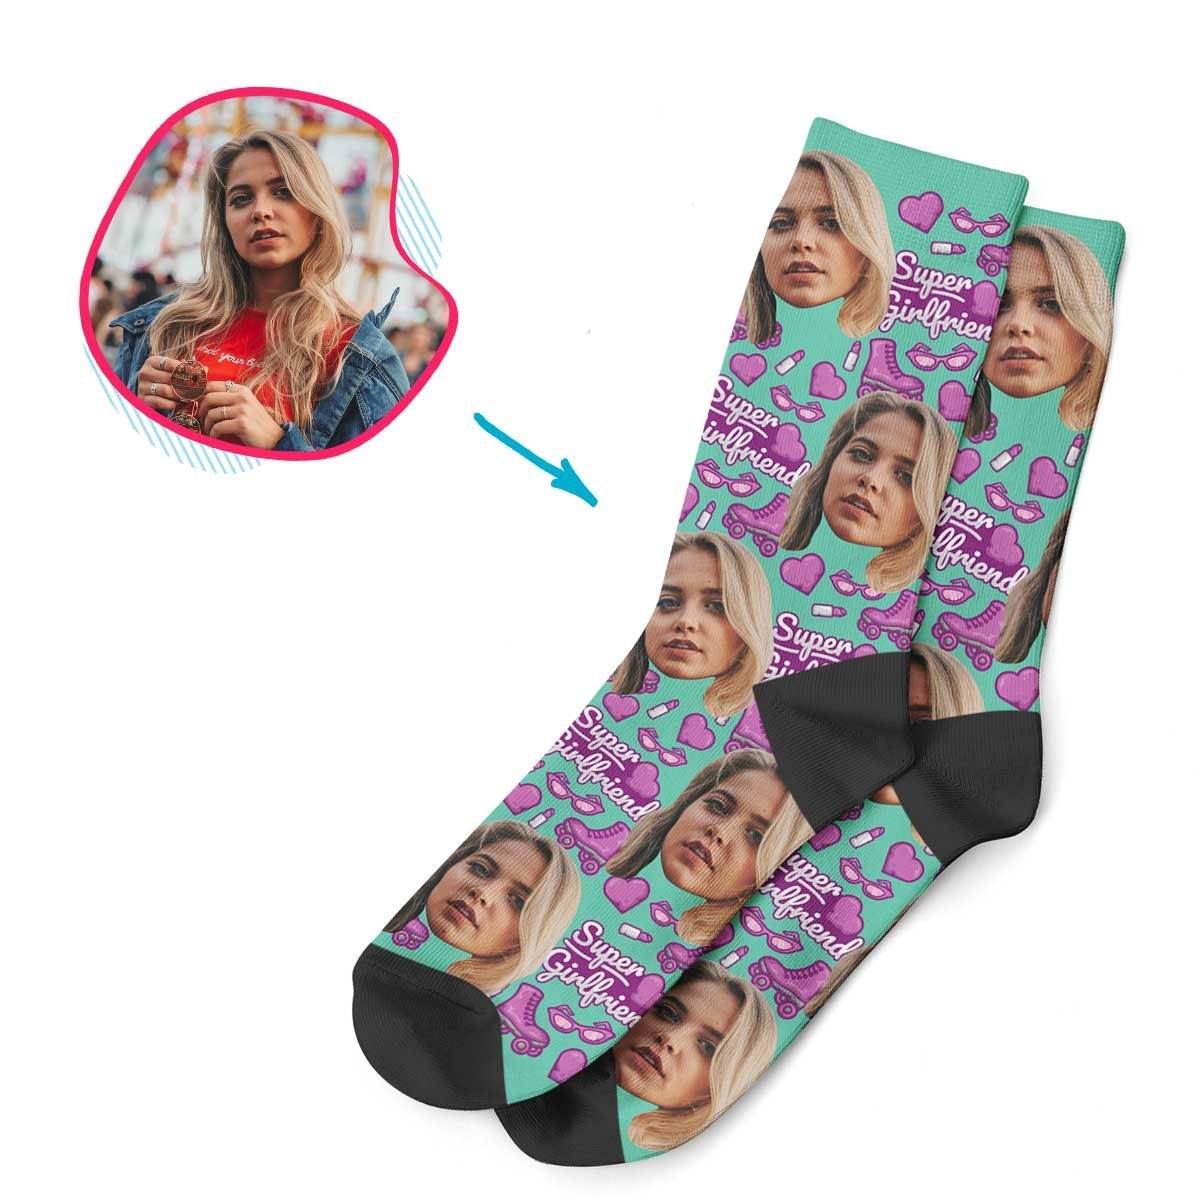 Mint Girlfriend personalized socks with photo of face printed on them